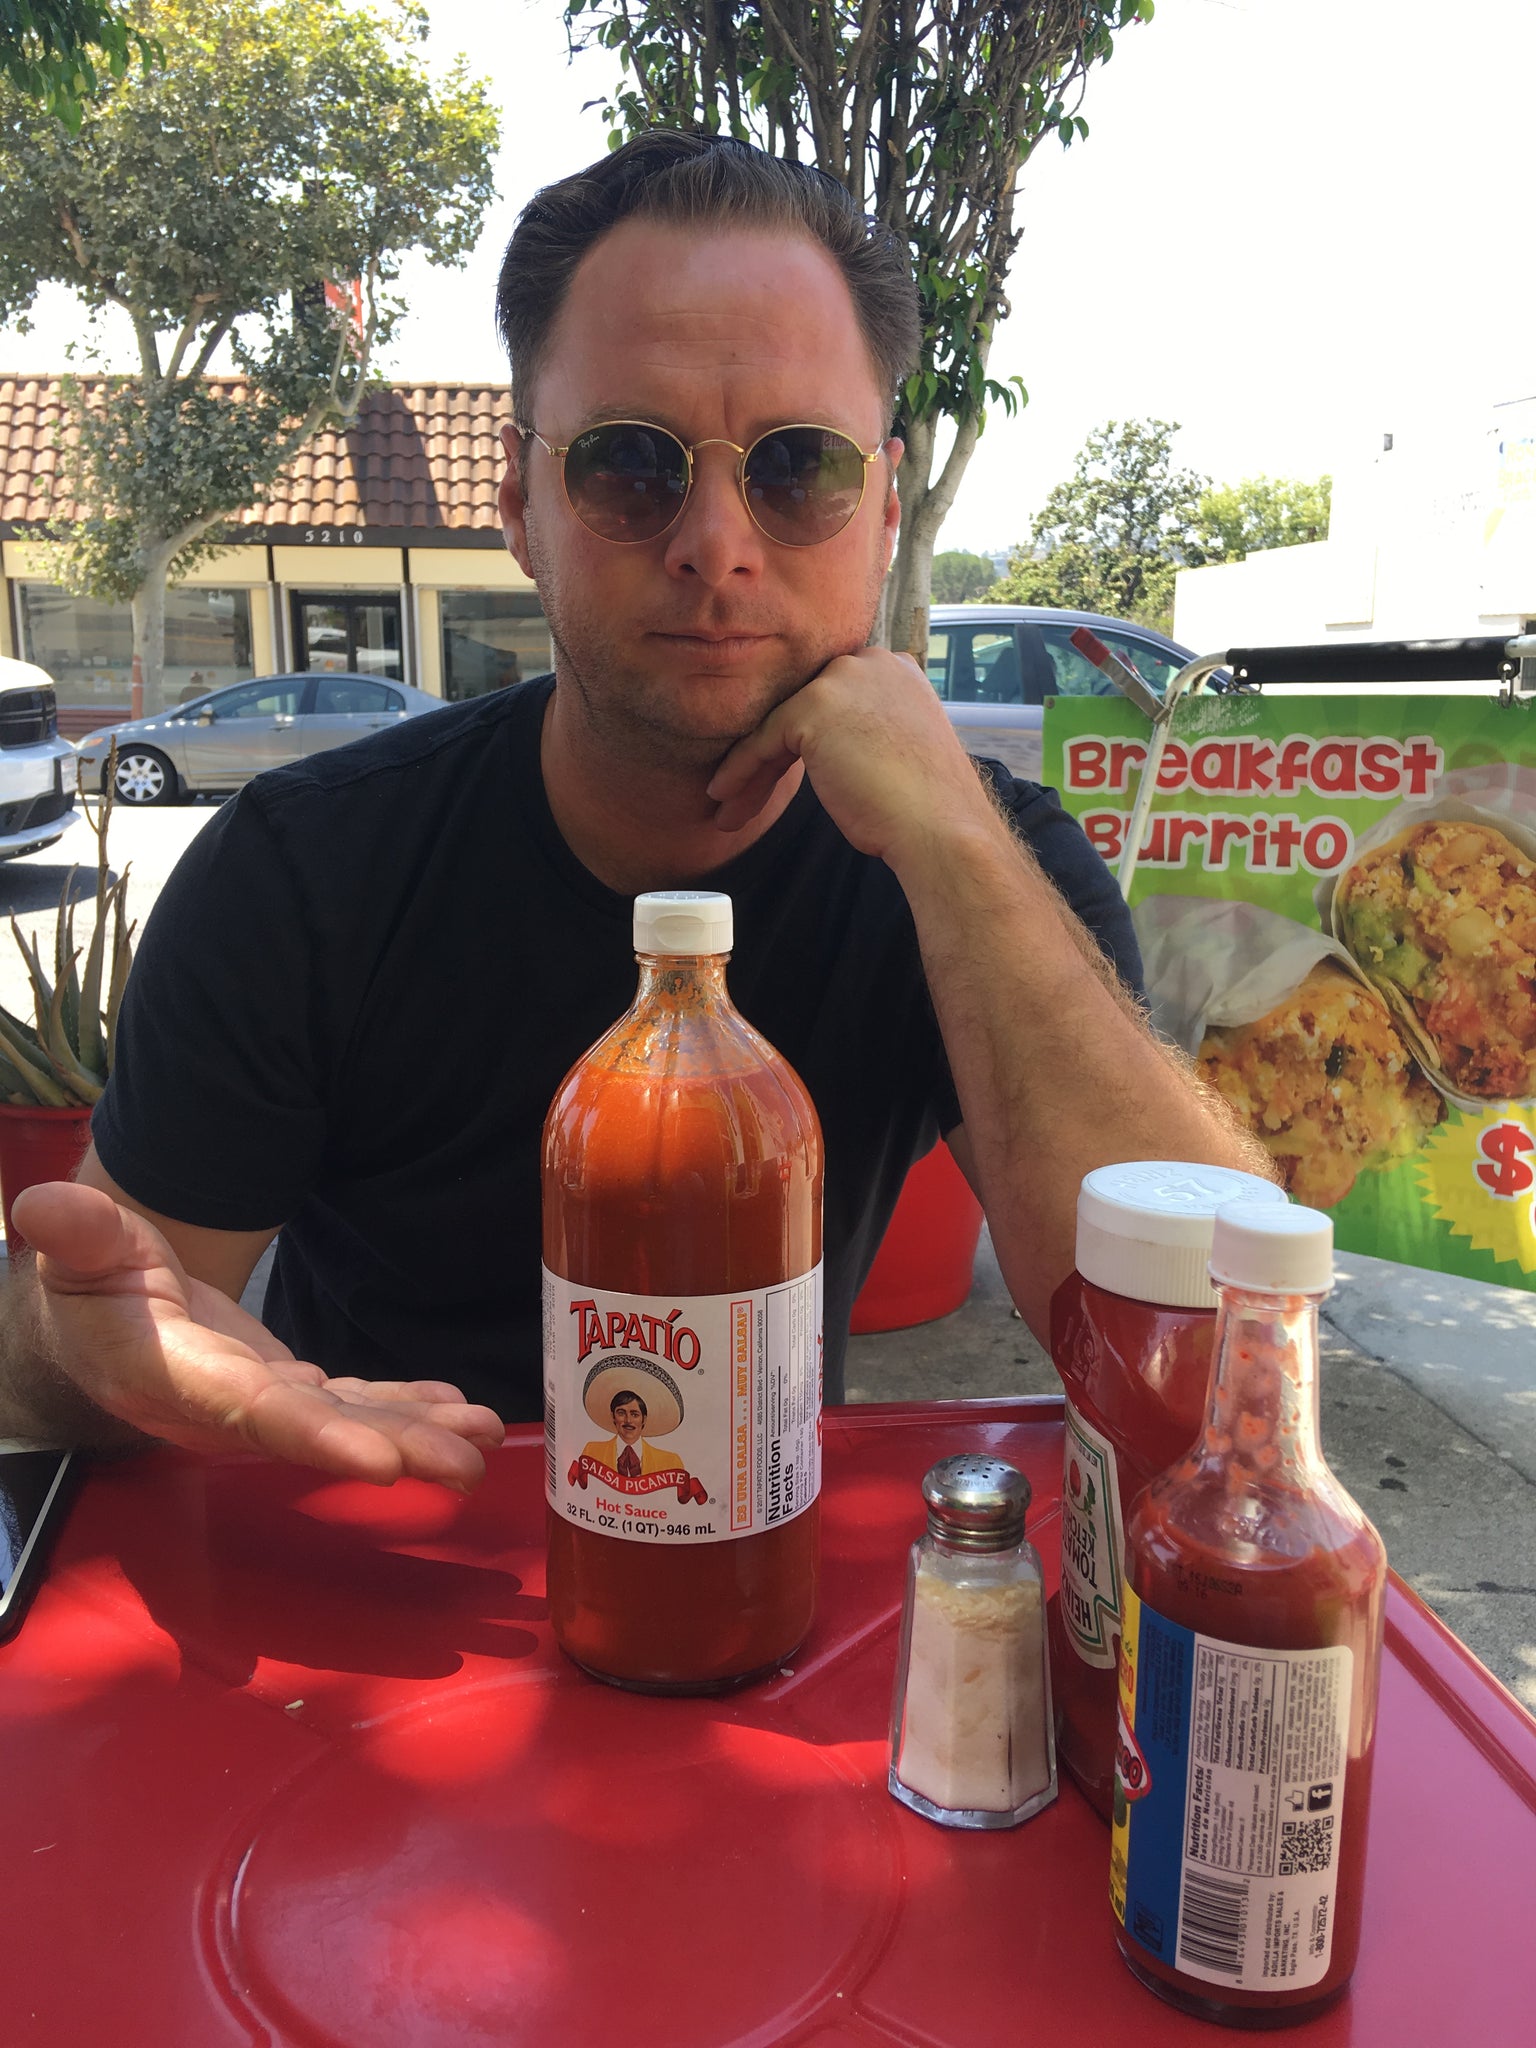 Ian and the large Tapatio